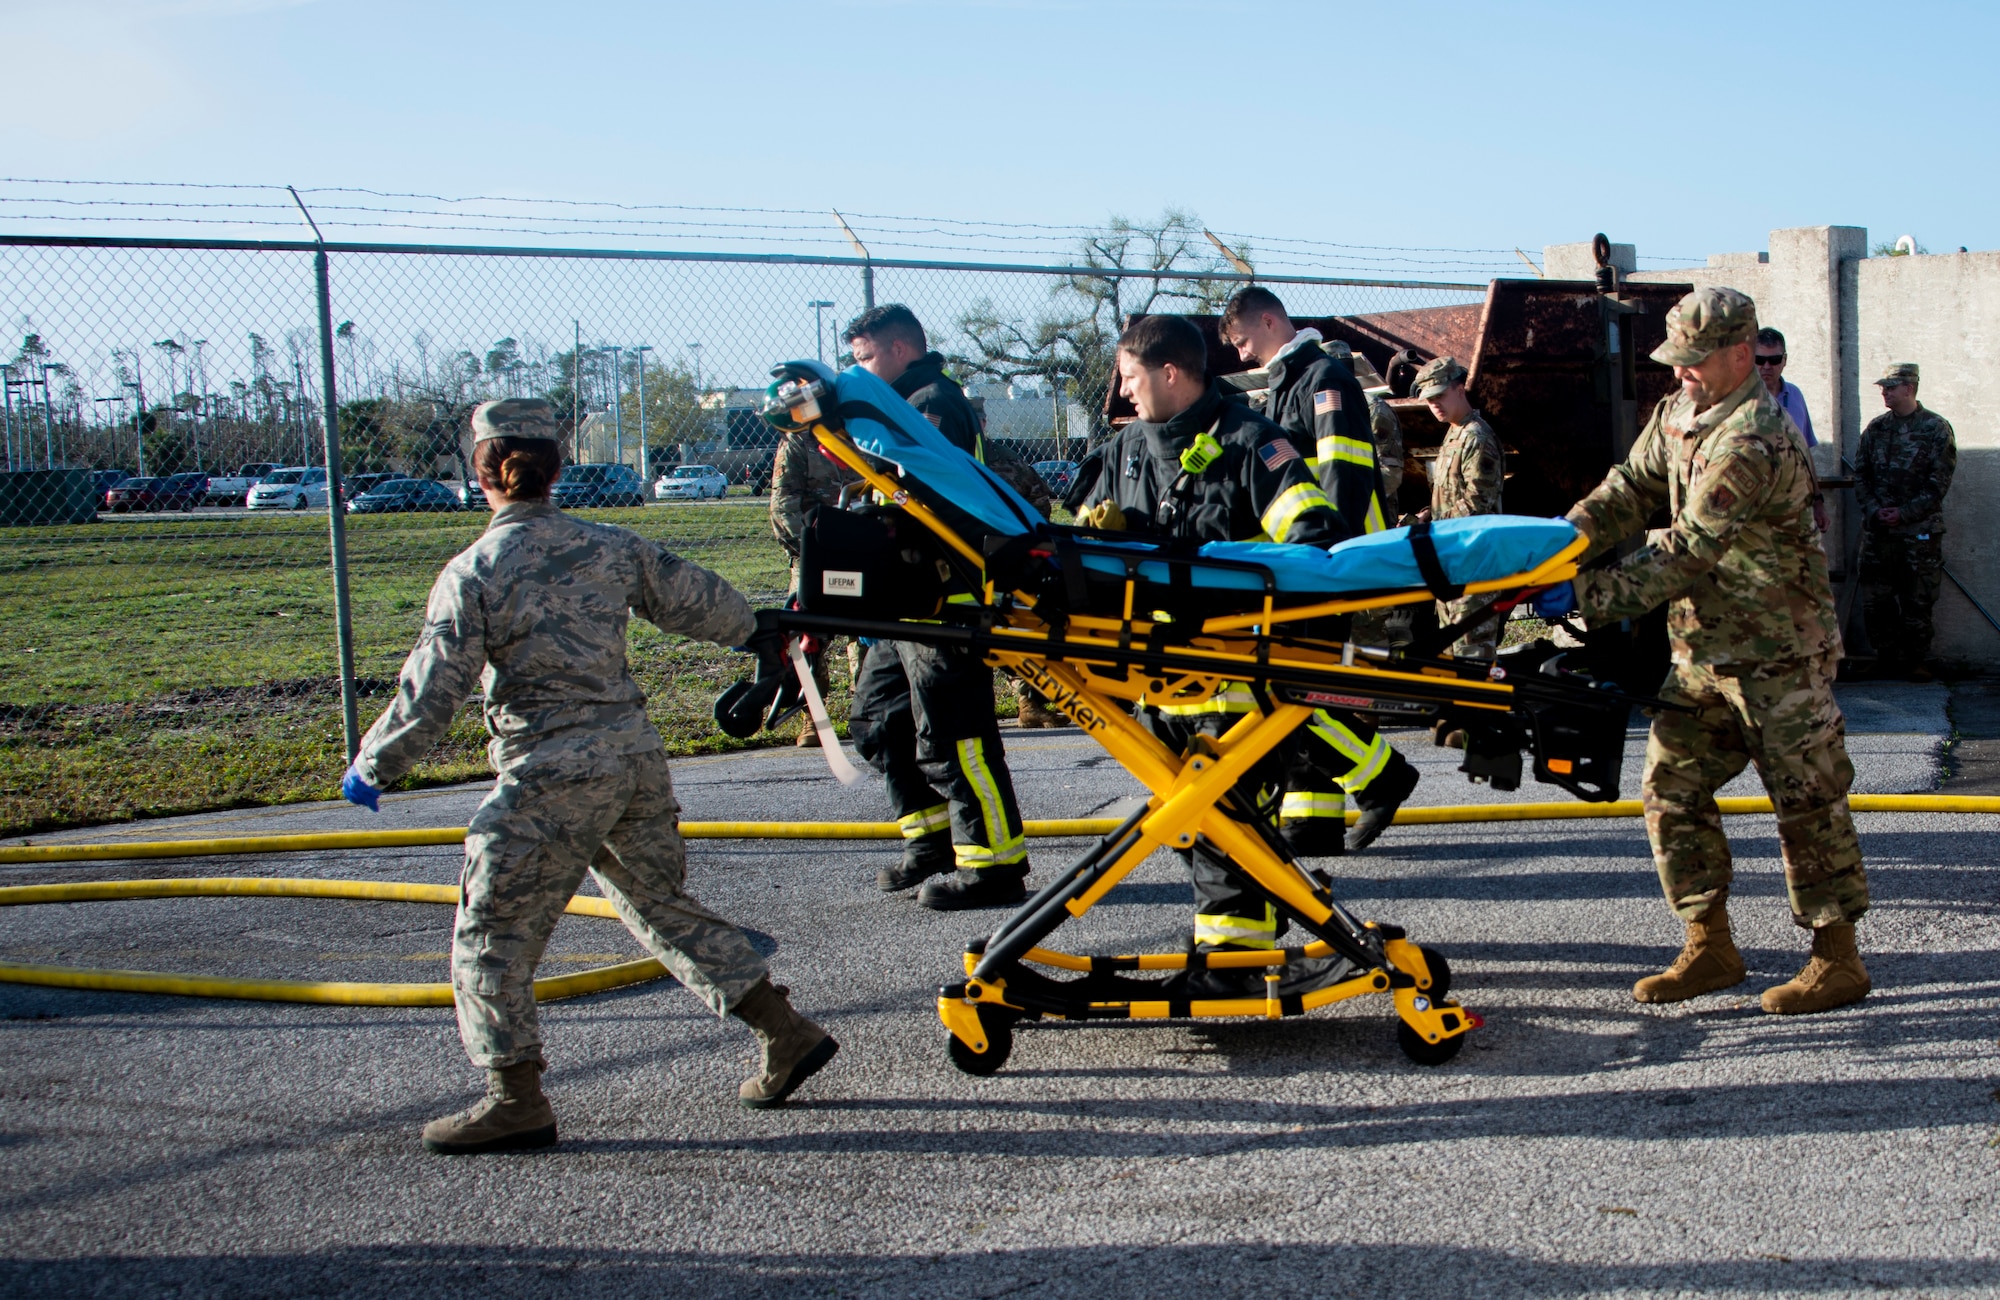 Senior Airman Ashley Deliz Aguilera, left, and Tech. Sgt. Wallace Boatright, right, 325th Operational Medical Readiness Squadron Ambulance Services Department technicians, move a stretcher for patient transfer during an exercise at Tyndall Air Force Base, Florida, March 12, 2020. The base participated in a joint exercise which included serval units from Tyndall and local emergency responders. The collaboration served to strengthen community relations and proper patient care during a medical emergency on base. (U.S. Air Force photo by 2nd Lt. Kayla Fitzgerald)